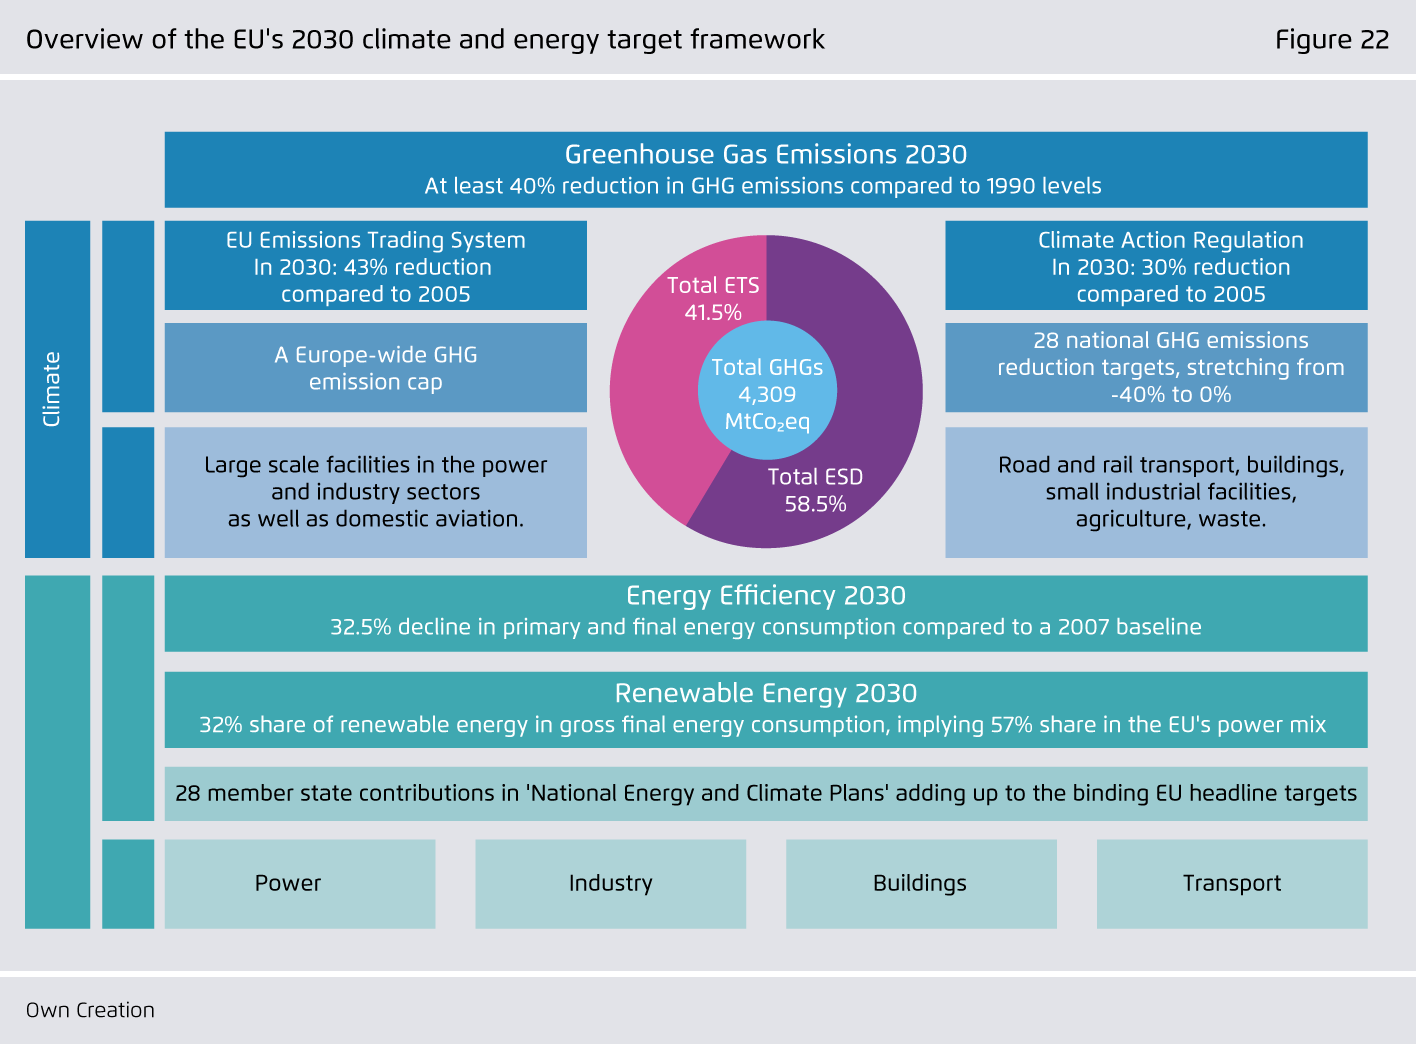 Preview for Overview of the EU's 2030 climate and energy target framework